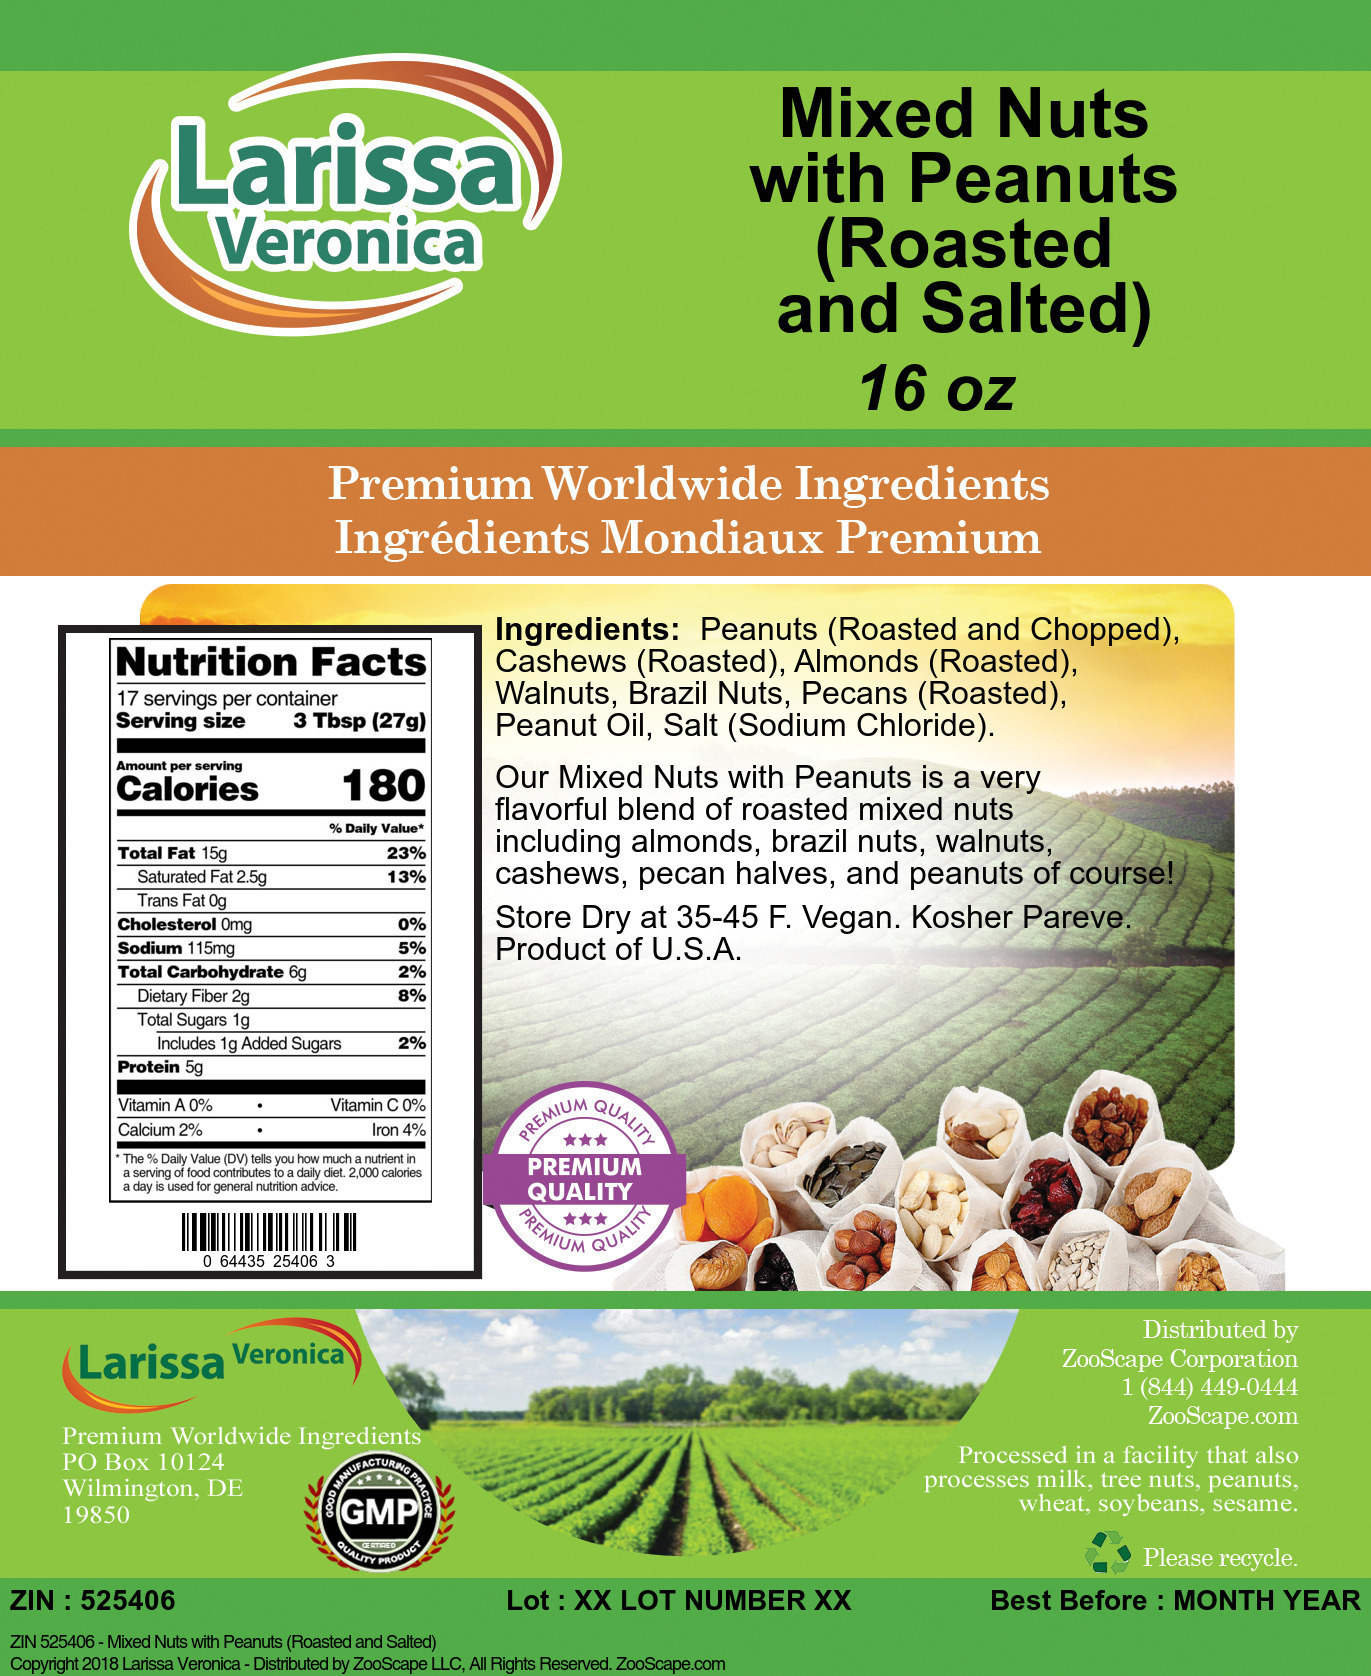 Mixed Nuts with Peanuts (Roasted and Salted) - Label